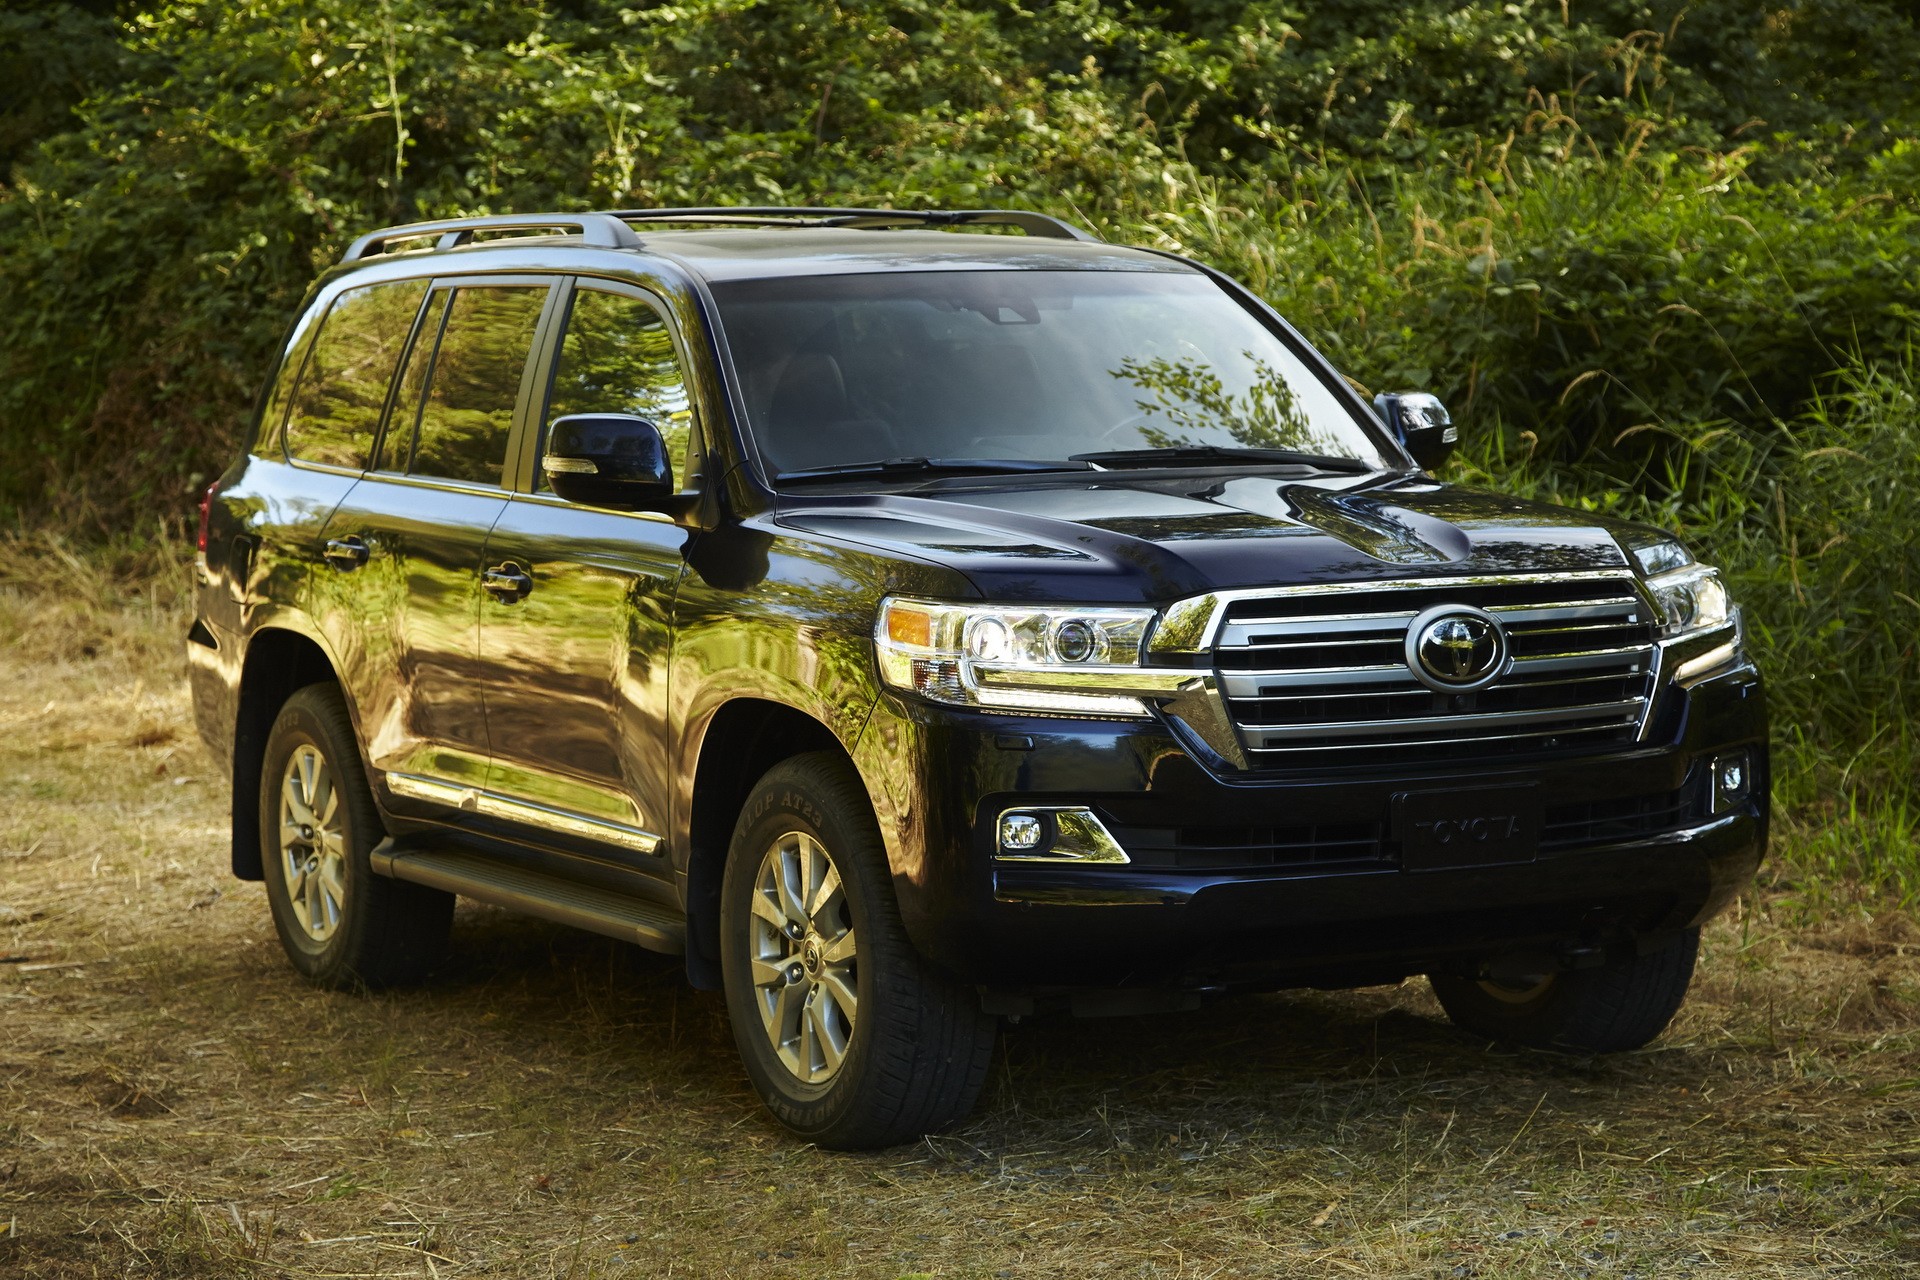 Toyota Land Cruiser Gets More Expensive For the 2019 Model Year